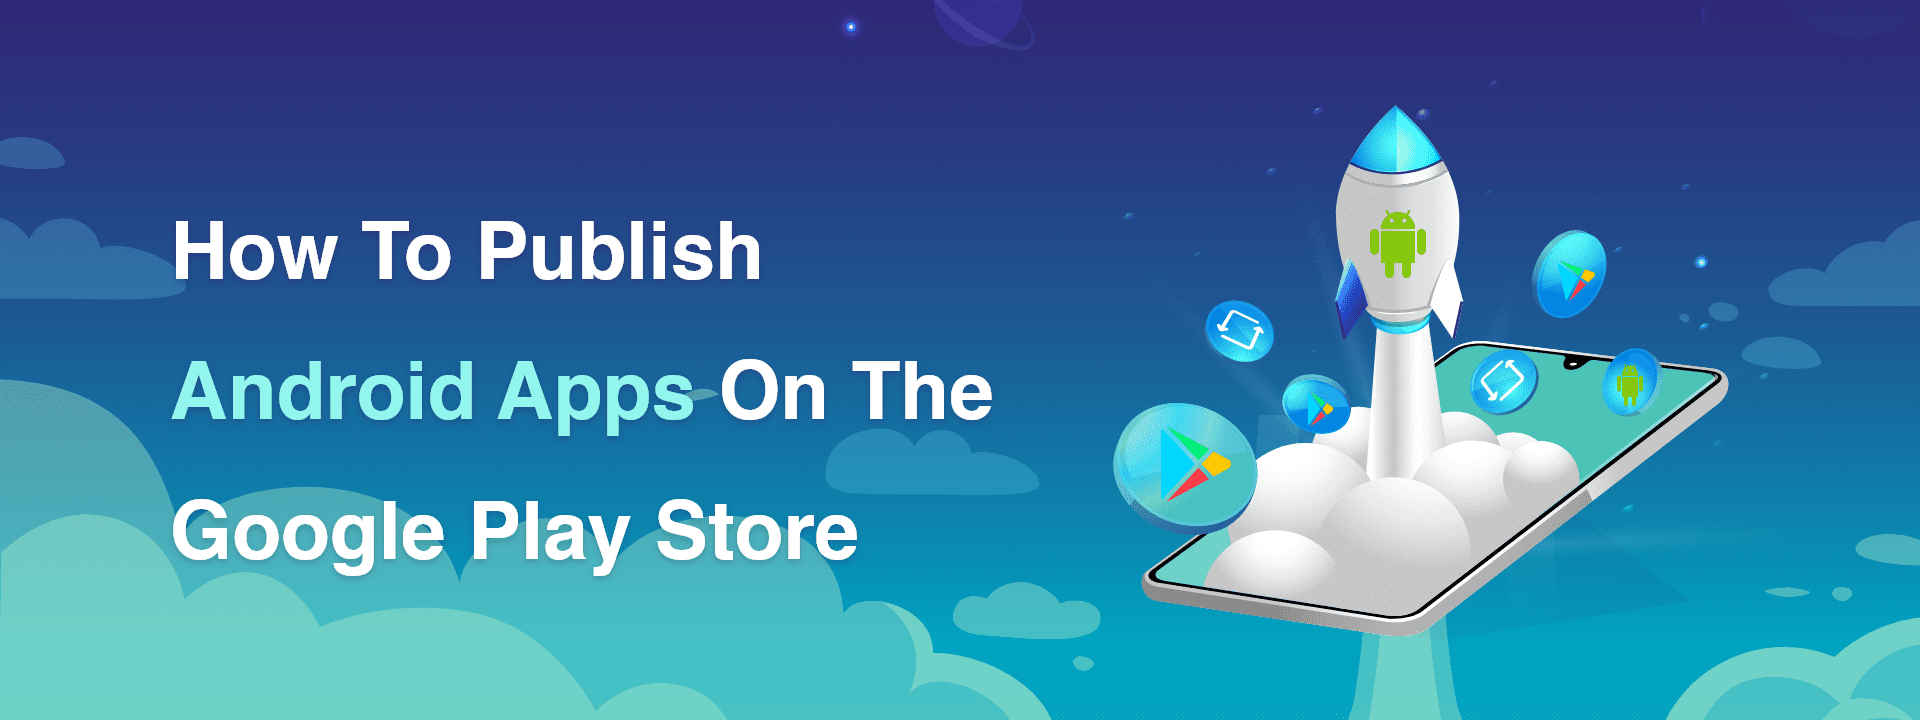 publish Android apps on the Google Play store